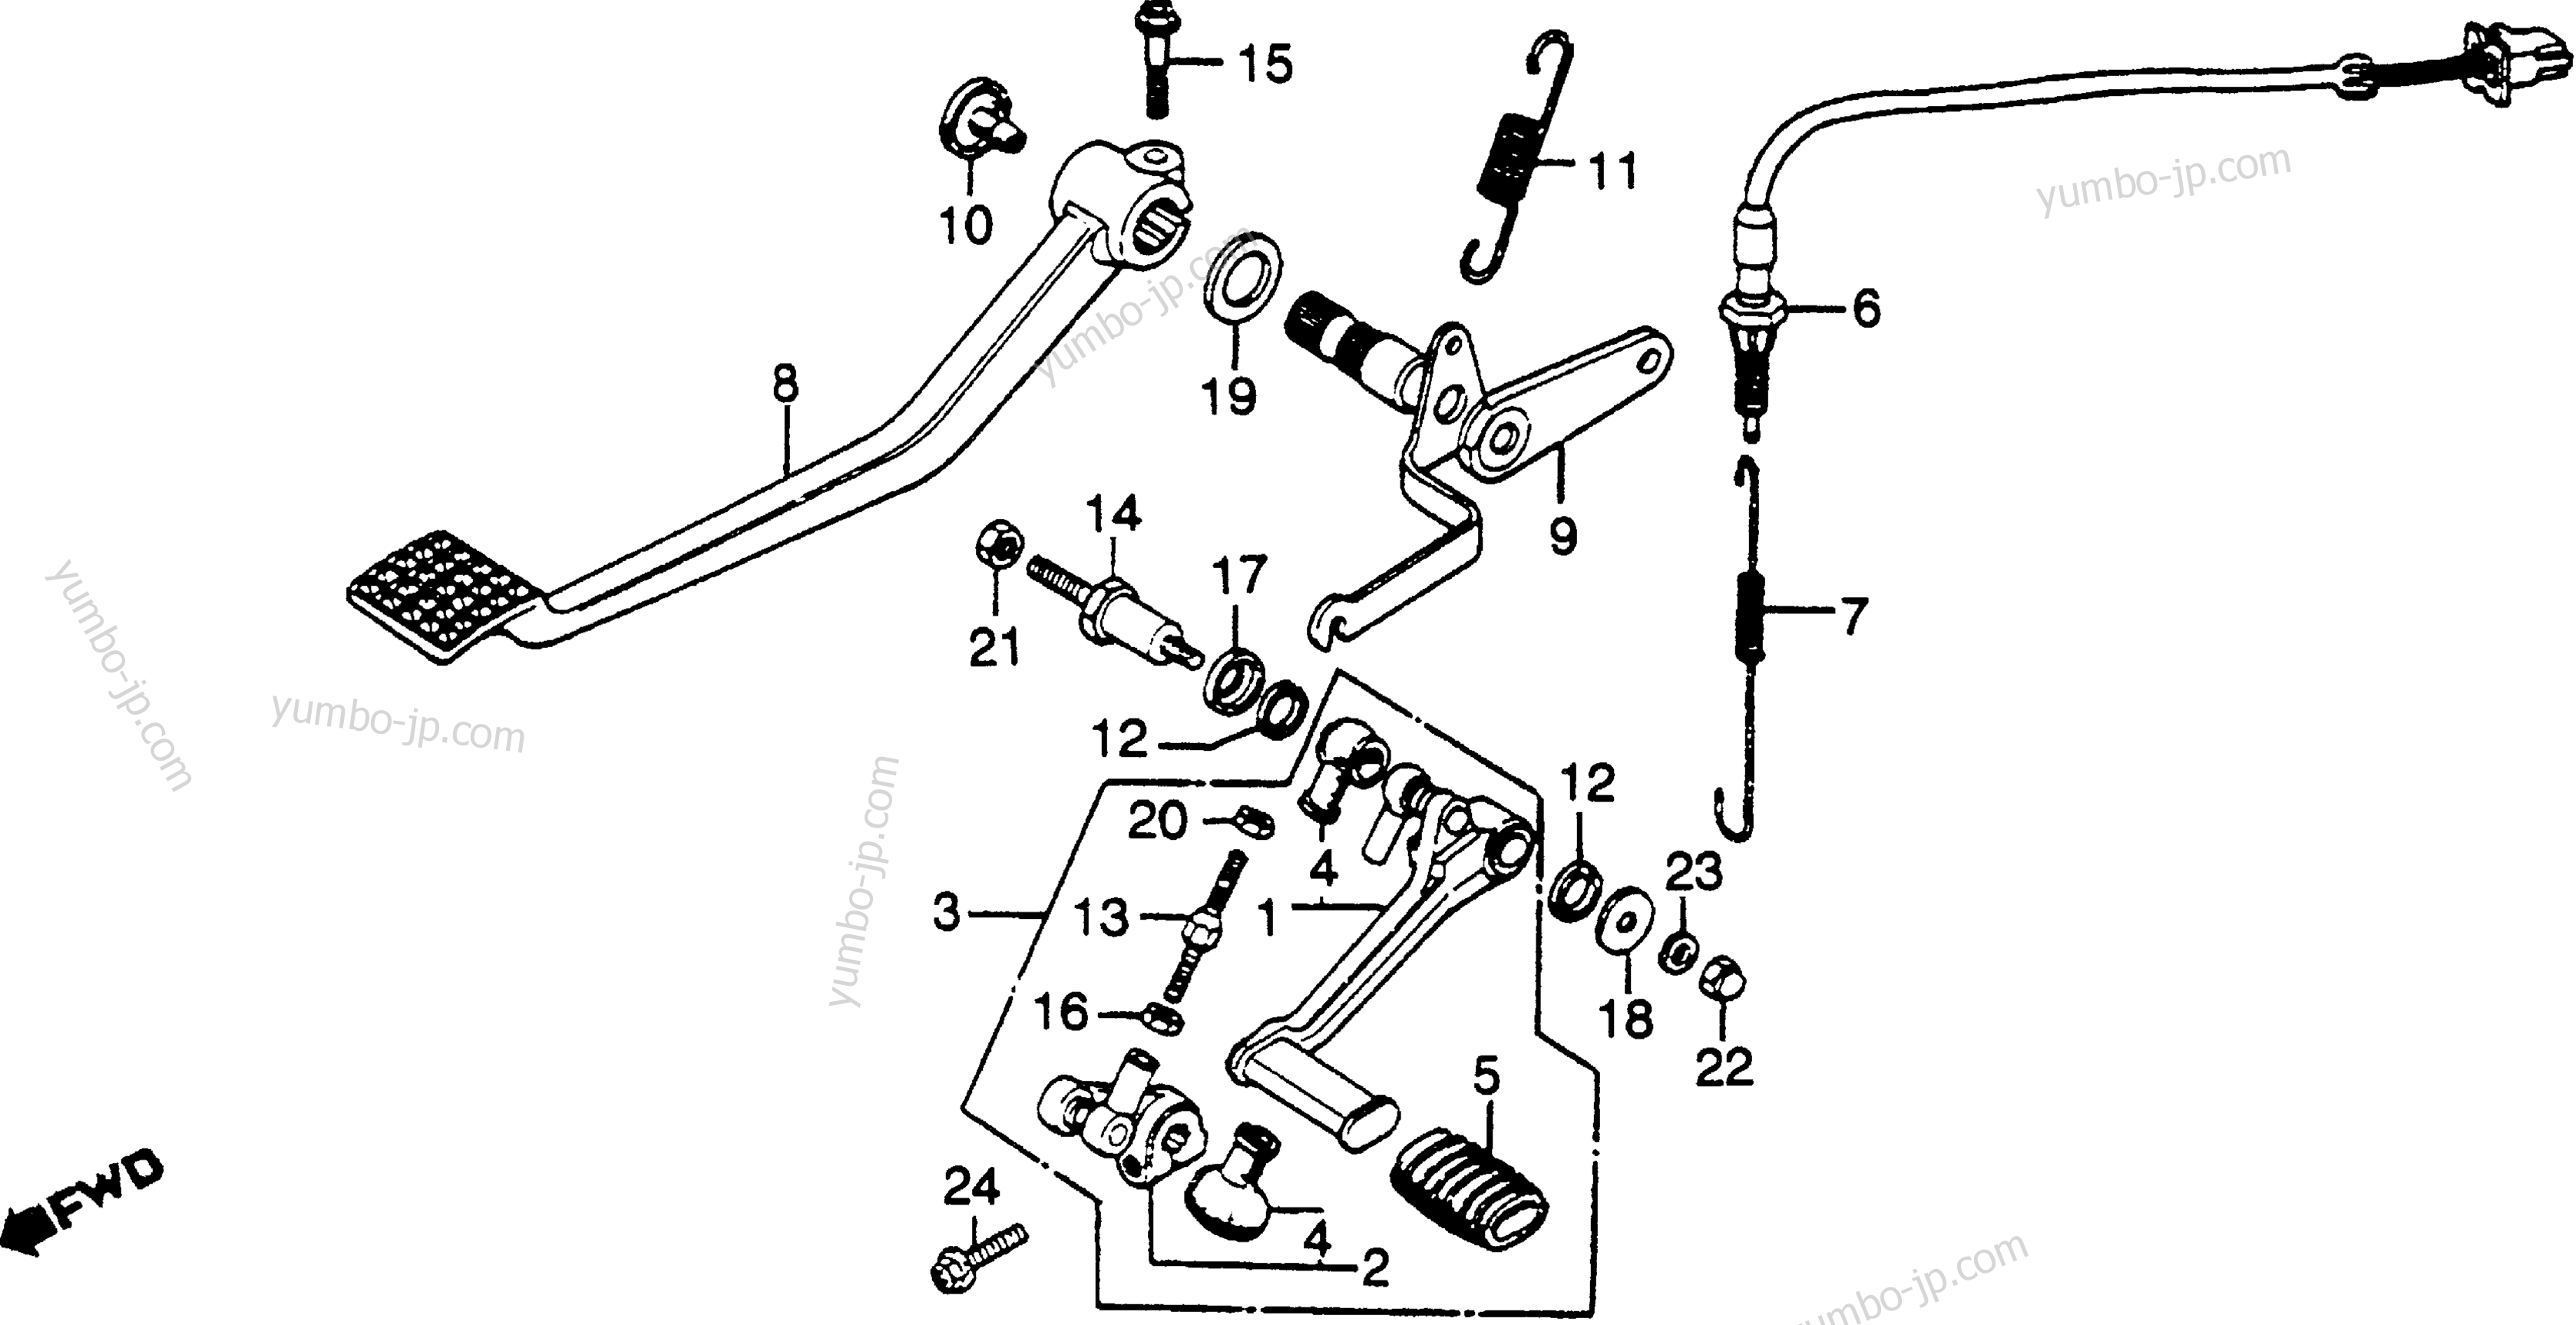 BRAKE PEDAL / SHIFT PEDAL for motorcycles HONDA CBX A 1980 year